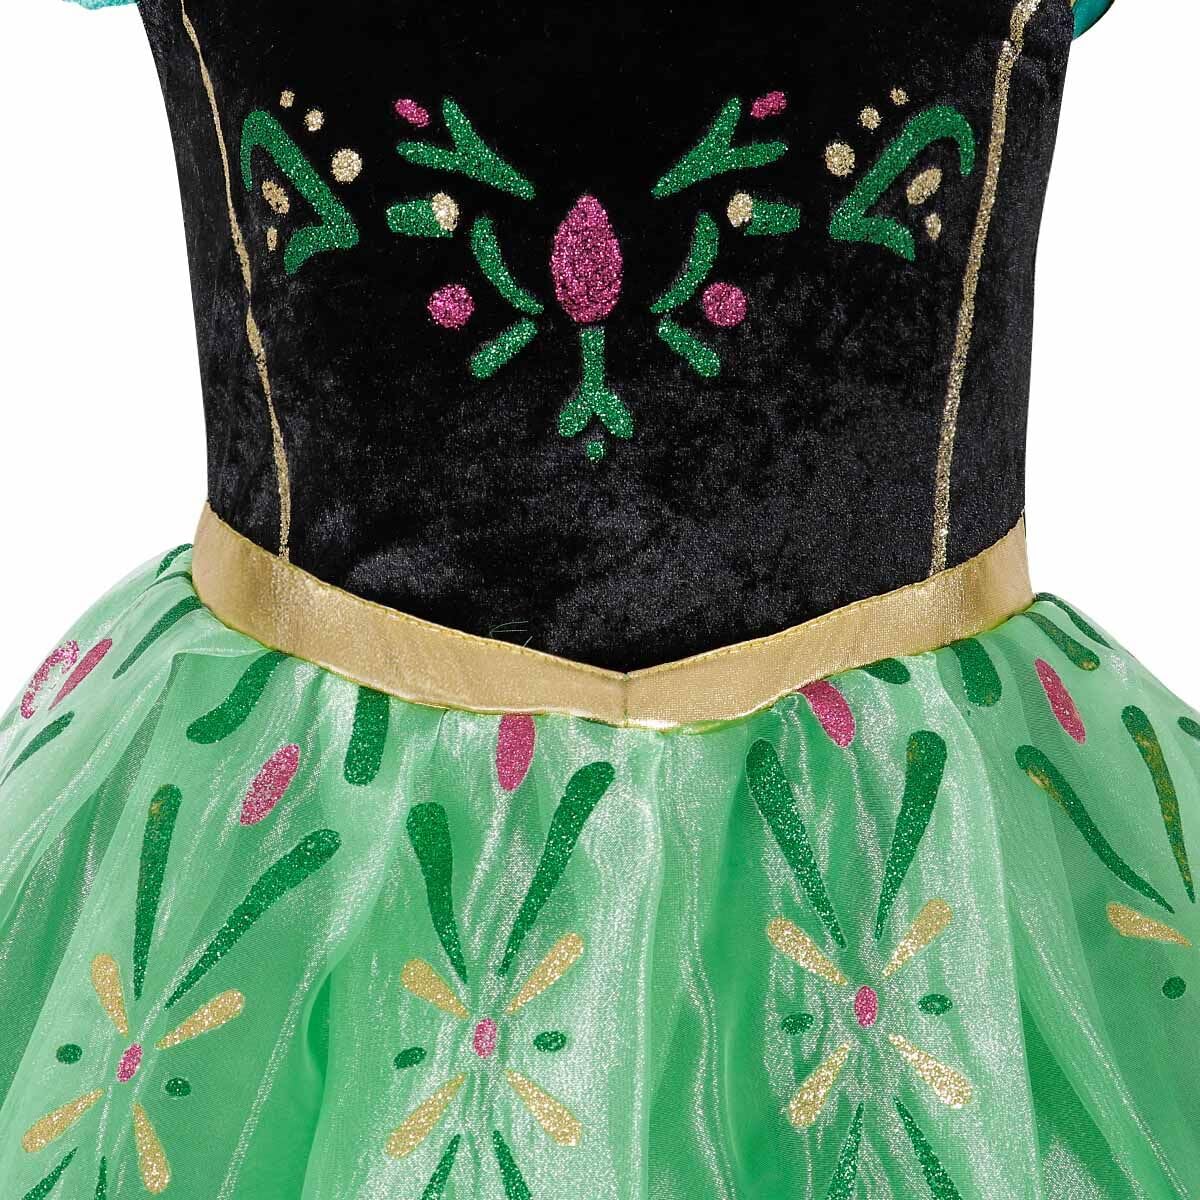 LOEL Princess Costumes Birthday Party Costume Cosplay Dress Up for Little Girls,3-4T